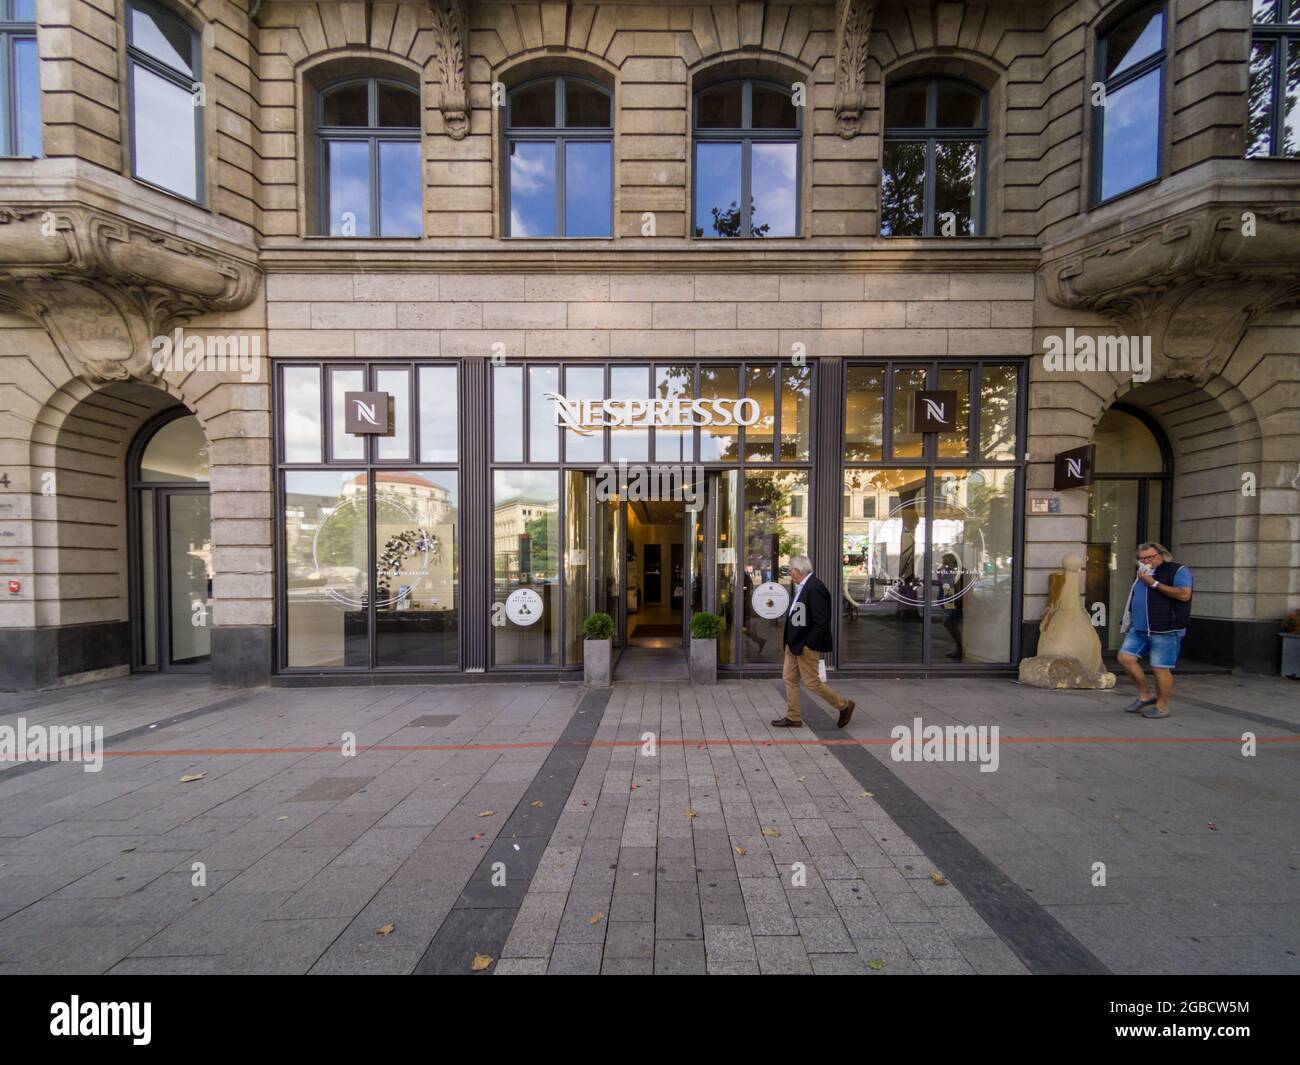 HANNOV, GERMANY - Jul 01, 2021: The building facade of Nespresso, a famous  brand of coffee pads and coffee machines in Hanover, Germany Stock Photo -  Alamy